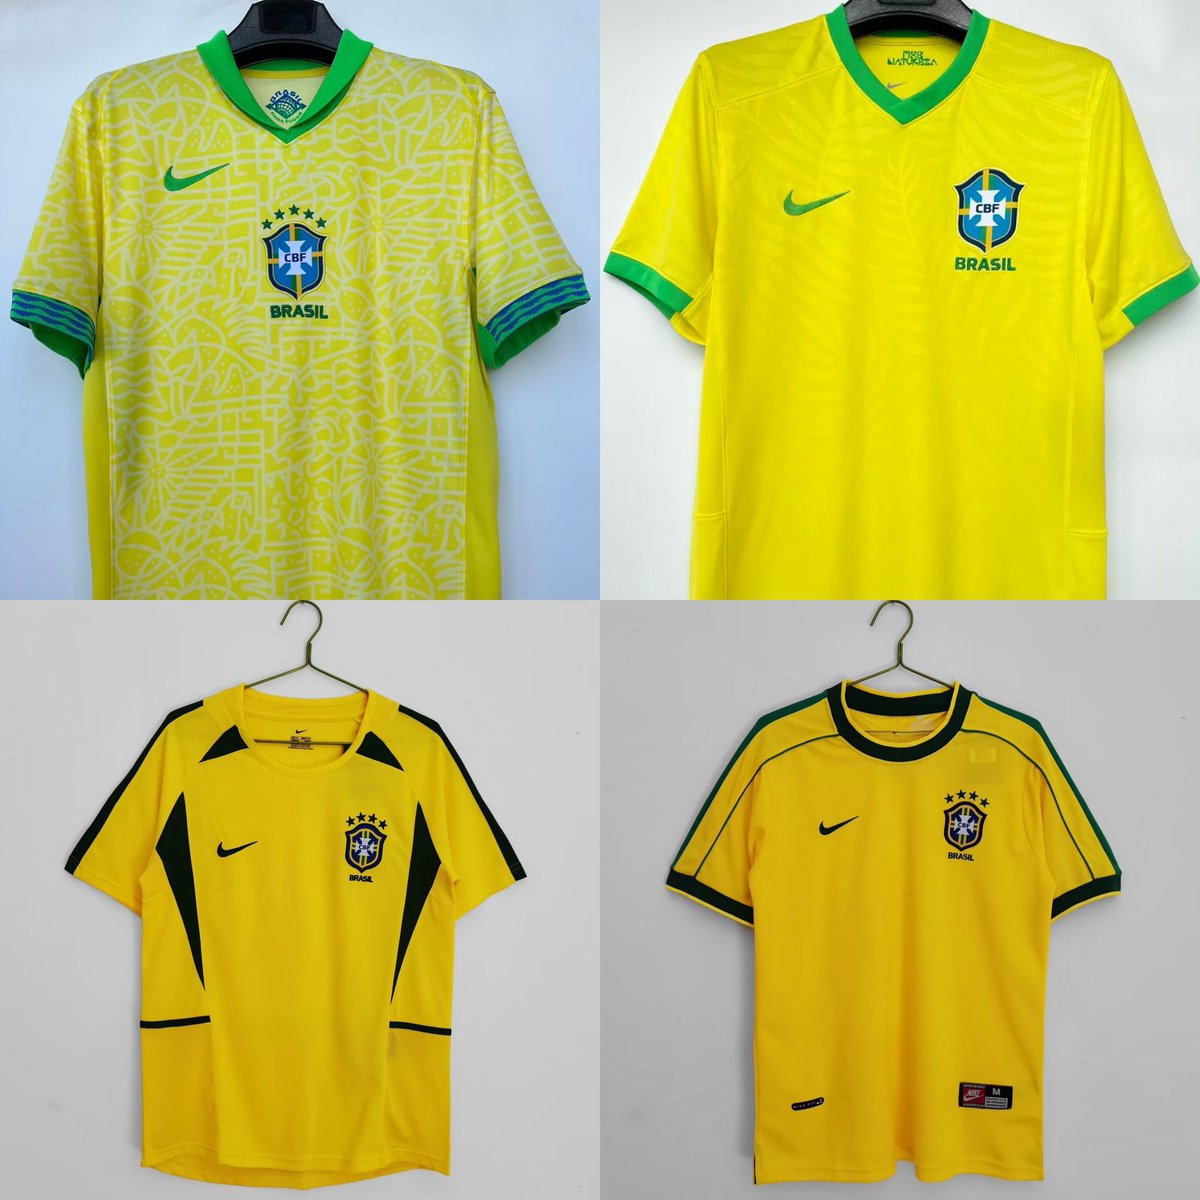 Brazil Current & Retro Shirts available on Our Site🔥 Free Worldwide Delivery🚚 S-4XL Available✅ Dm for Link to Site or any enquiries📥 Retweets Appreciated🔁